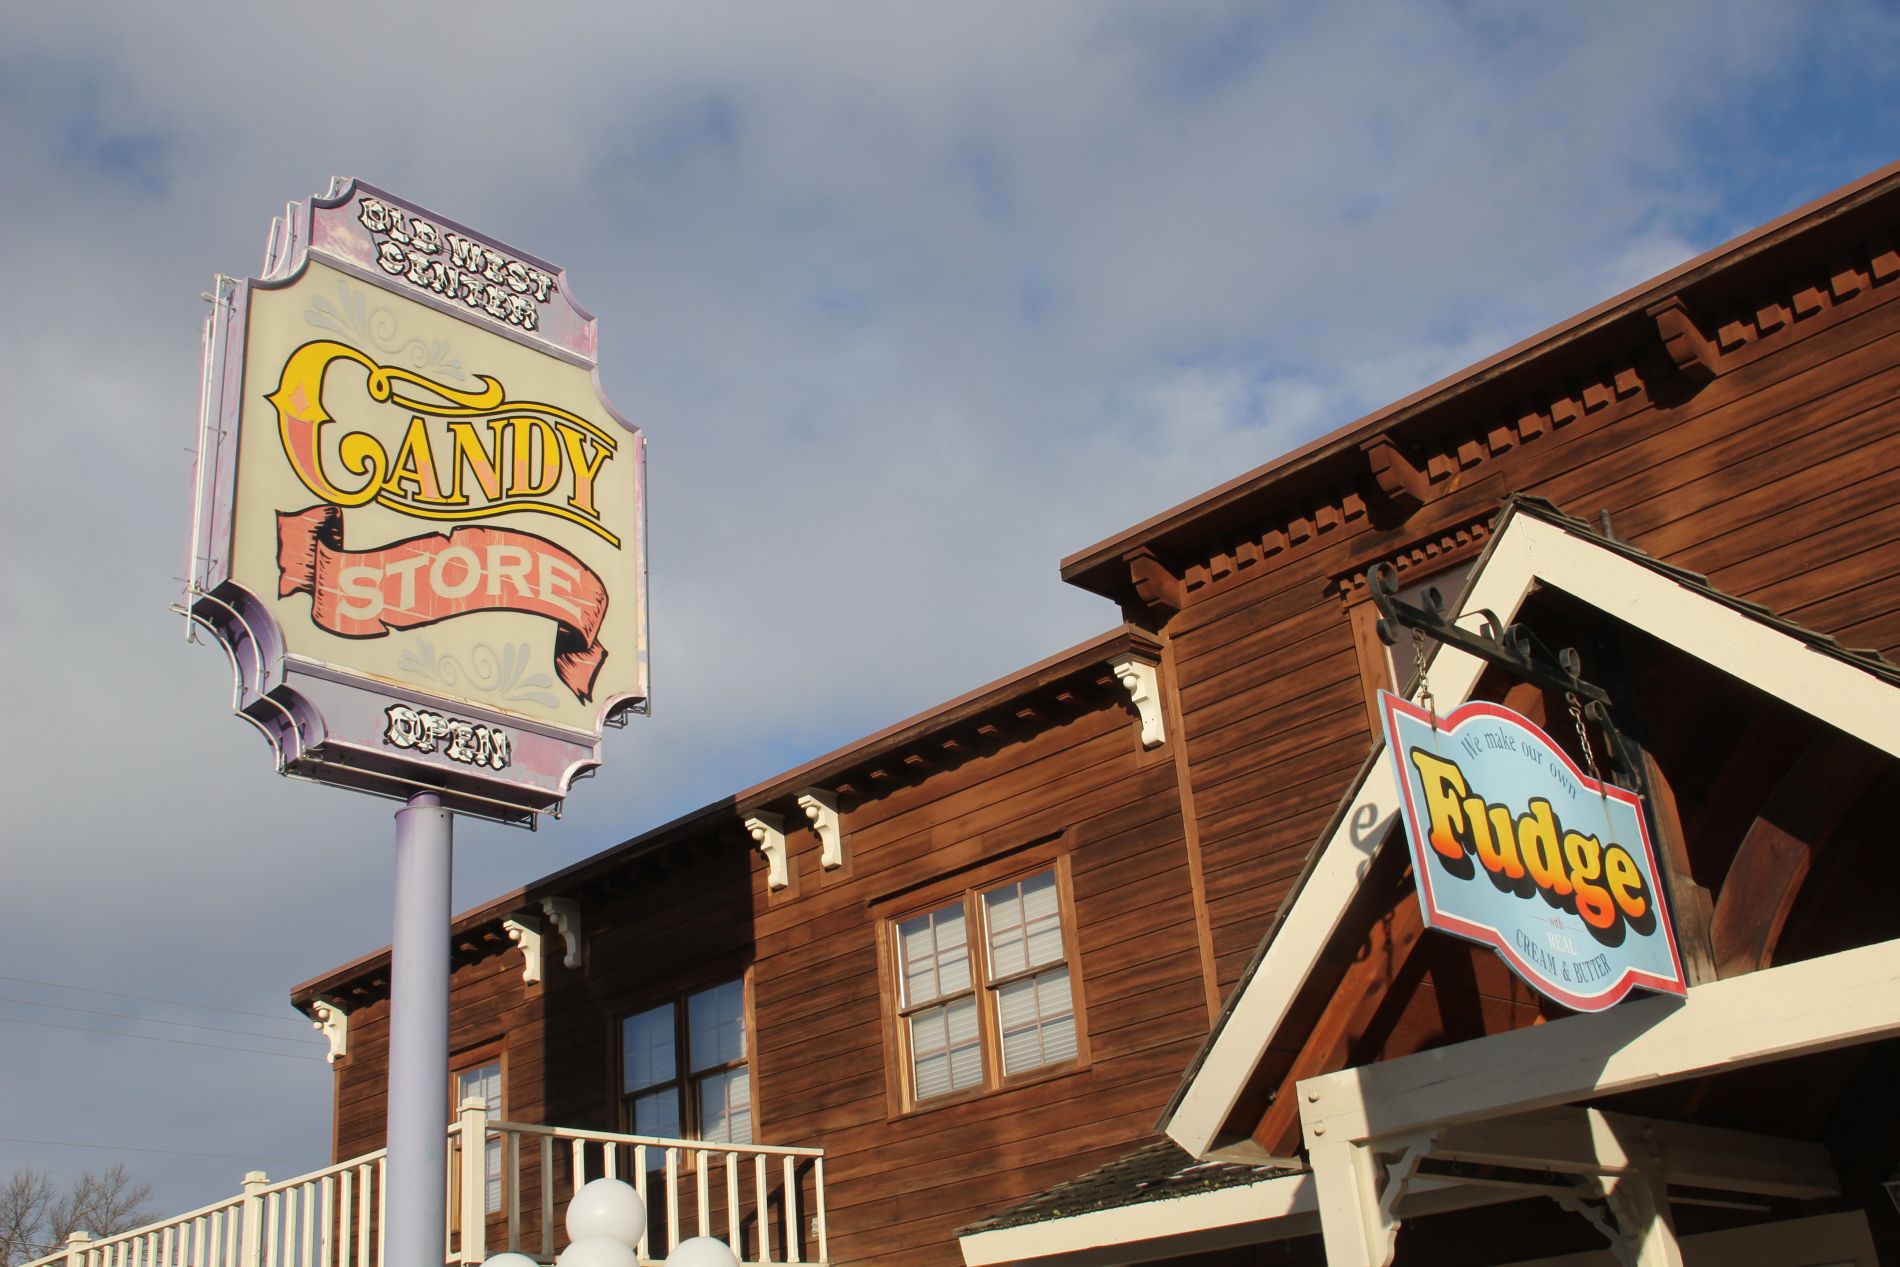 Candy Store in Darby, Montana